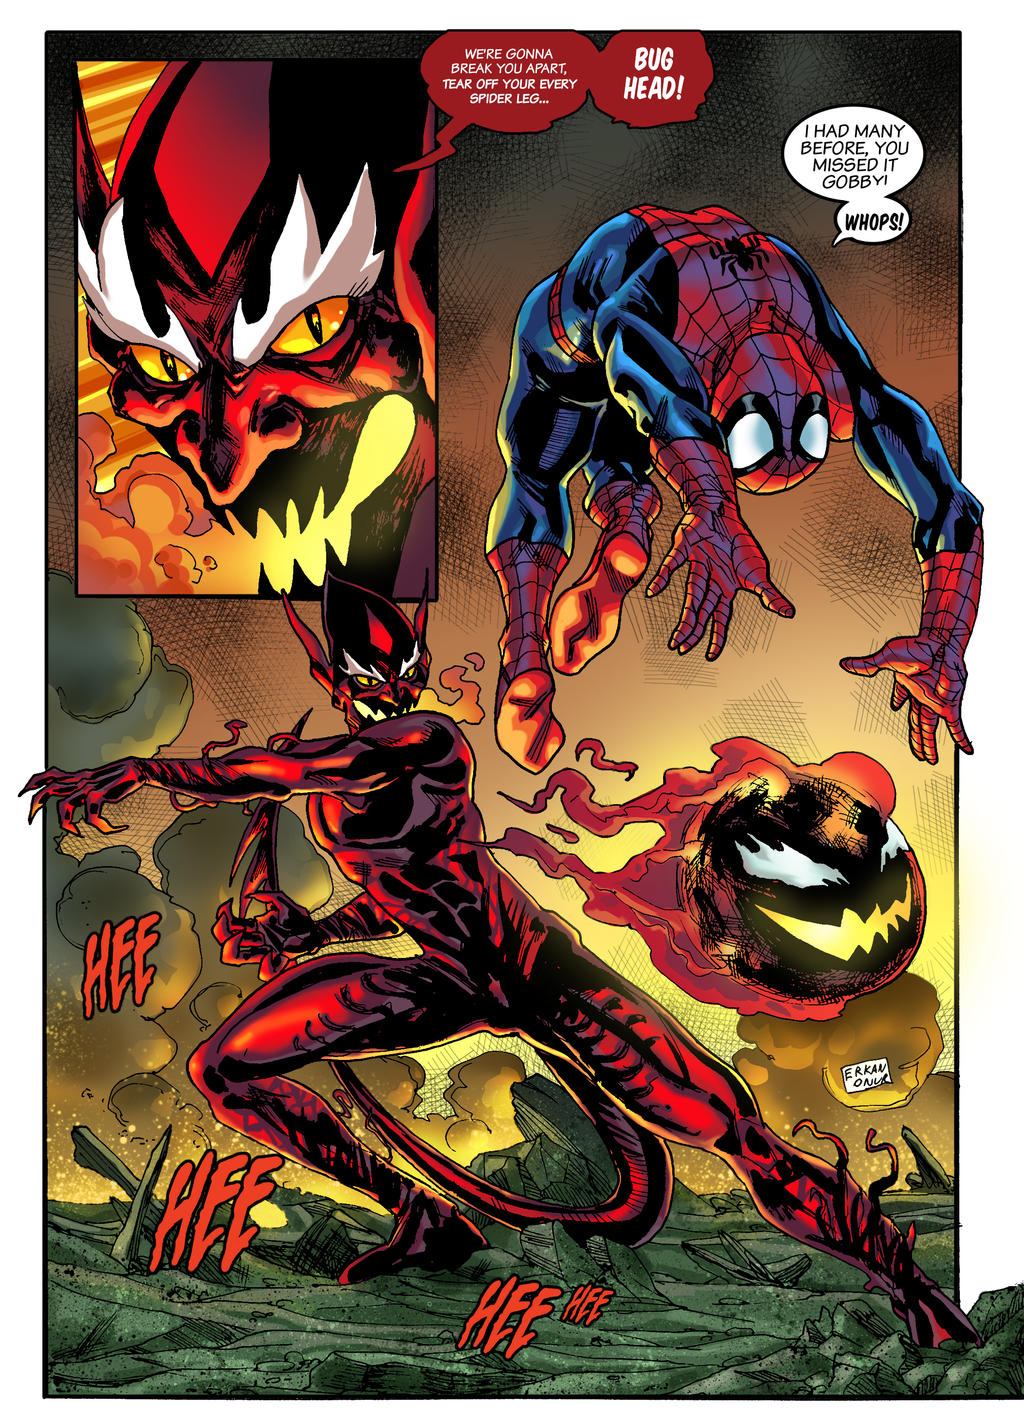 Red Goblin vs Spider-Man (colored) by sonicboom35 on DeviantArt